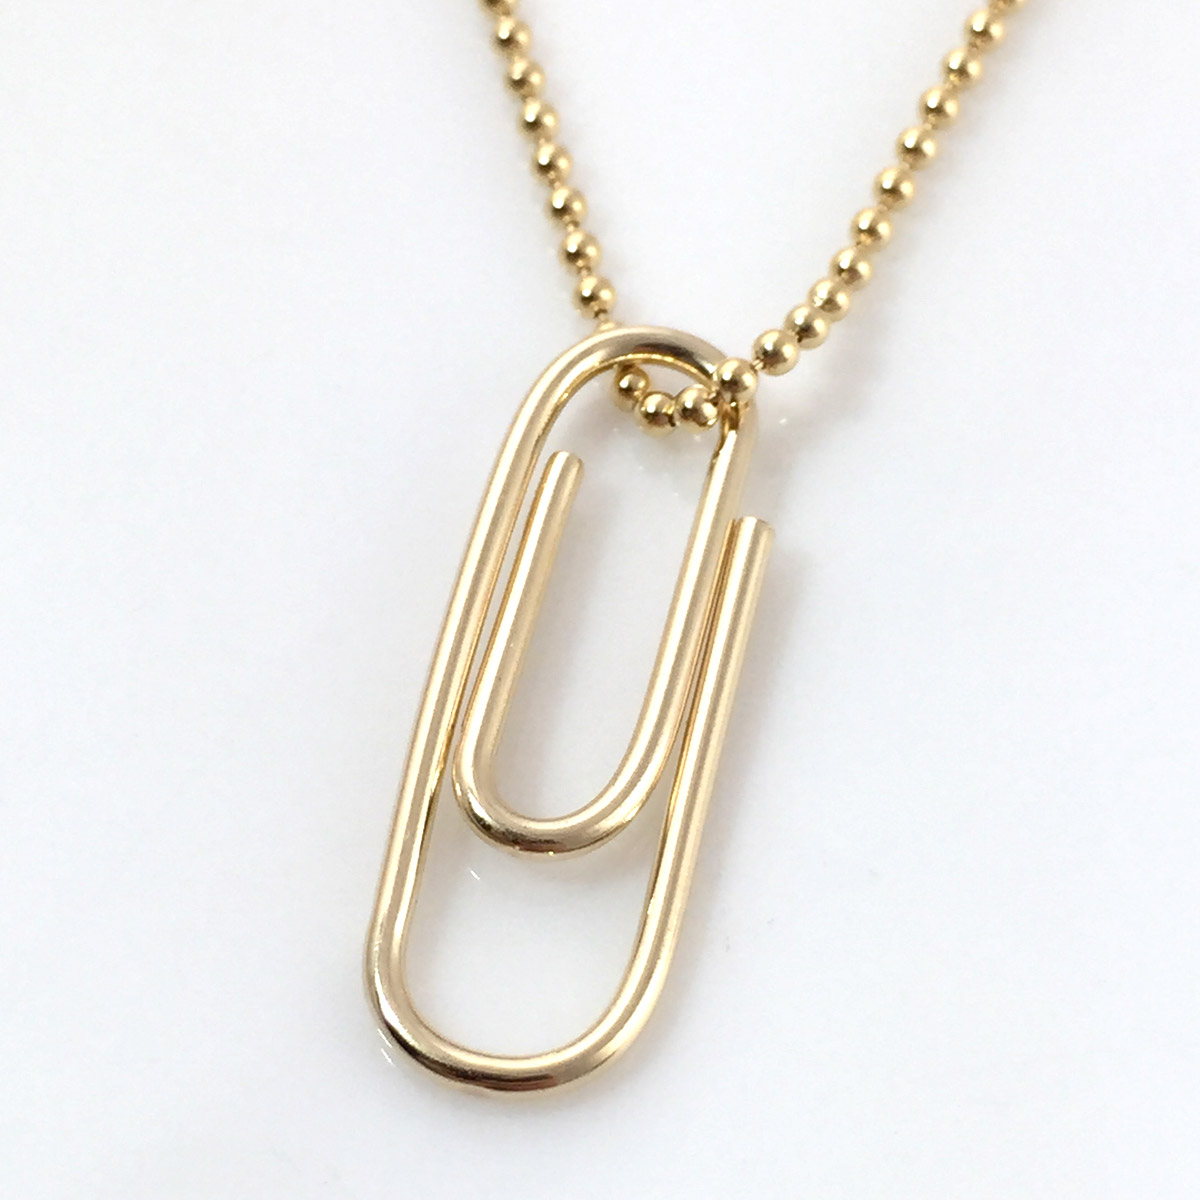 Paperclip Necklace / Yellow Gold-Filled